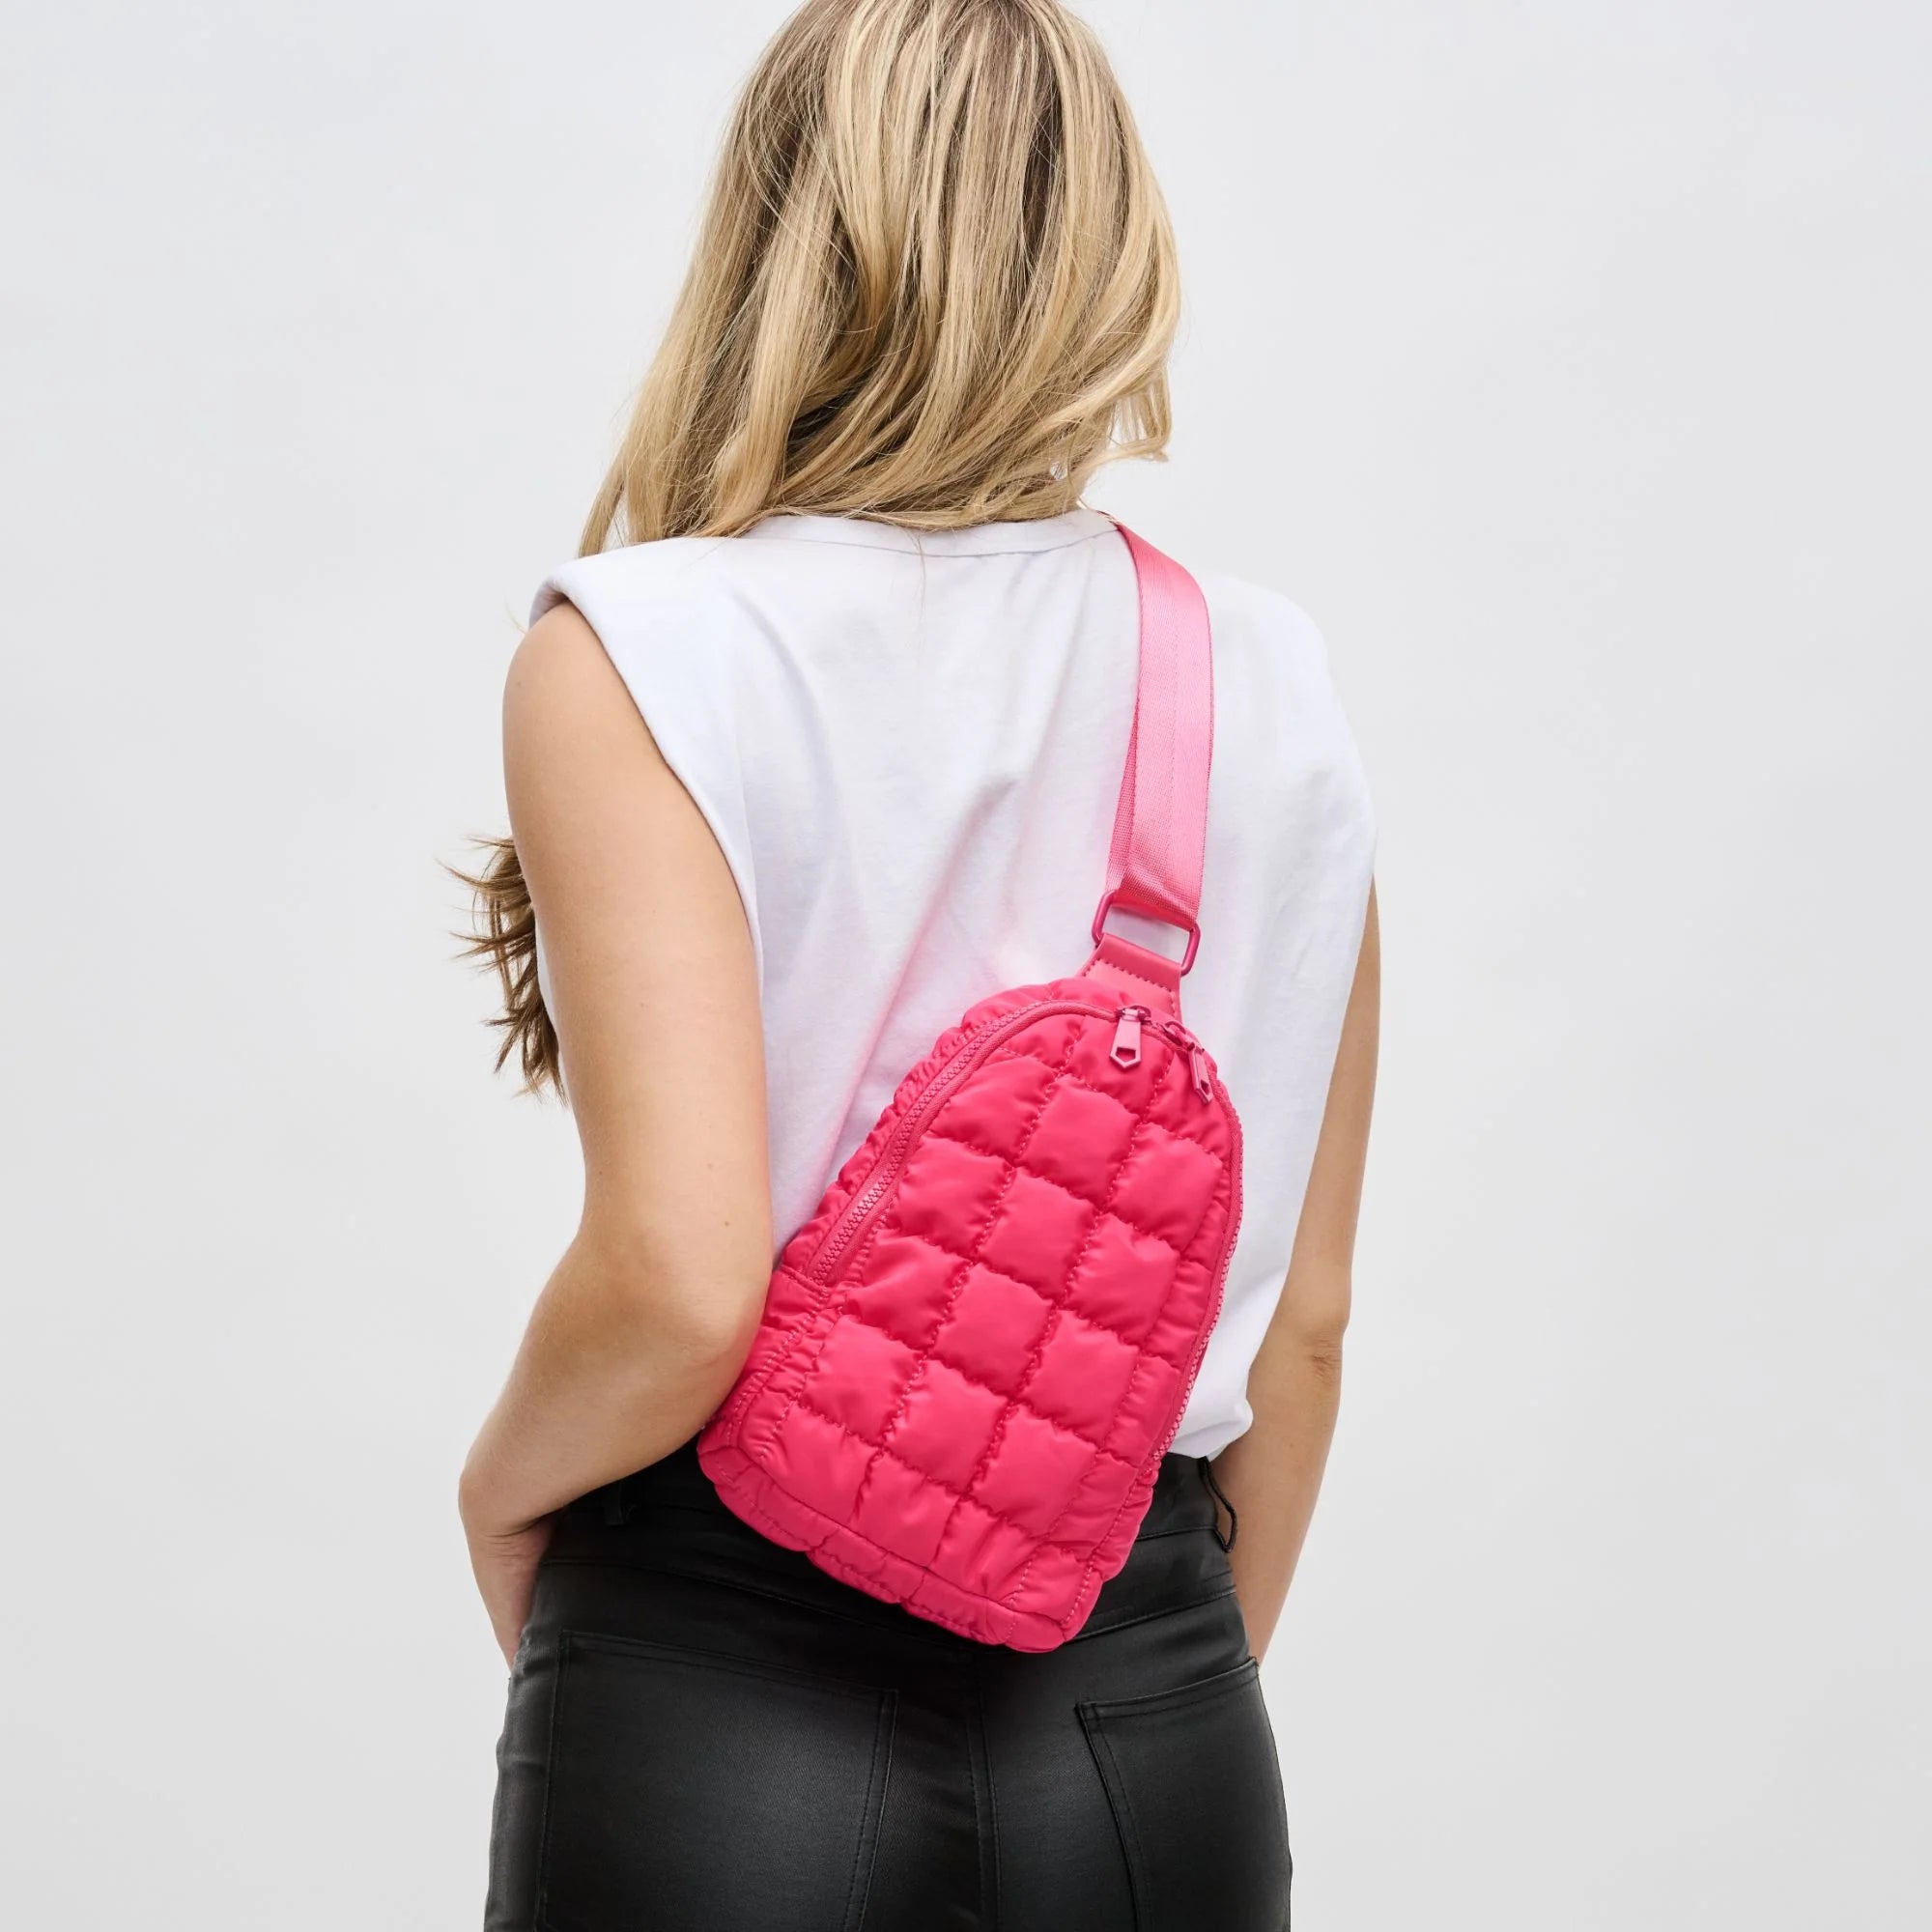 model wearing a pink sling quilted backpack